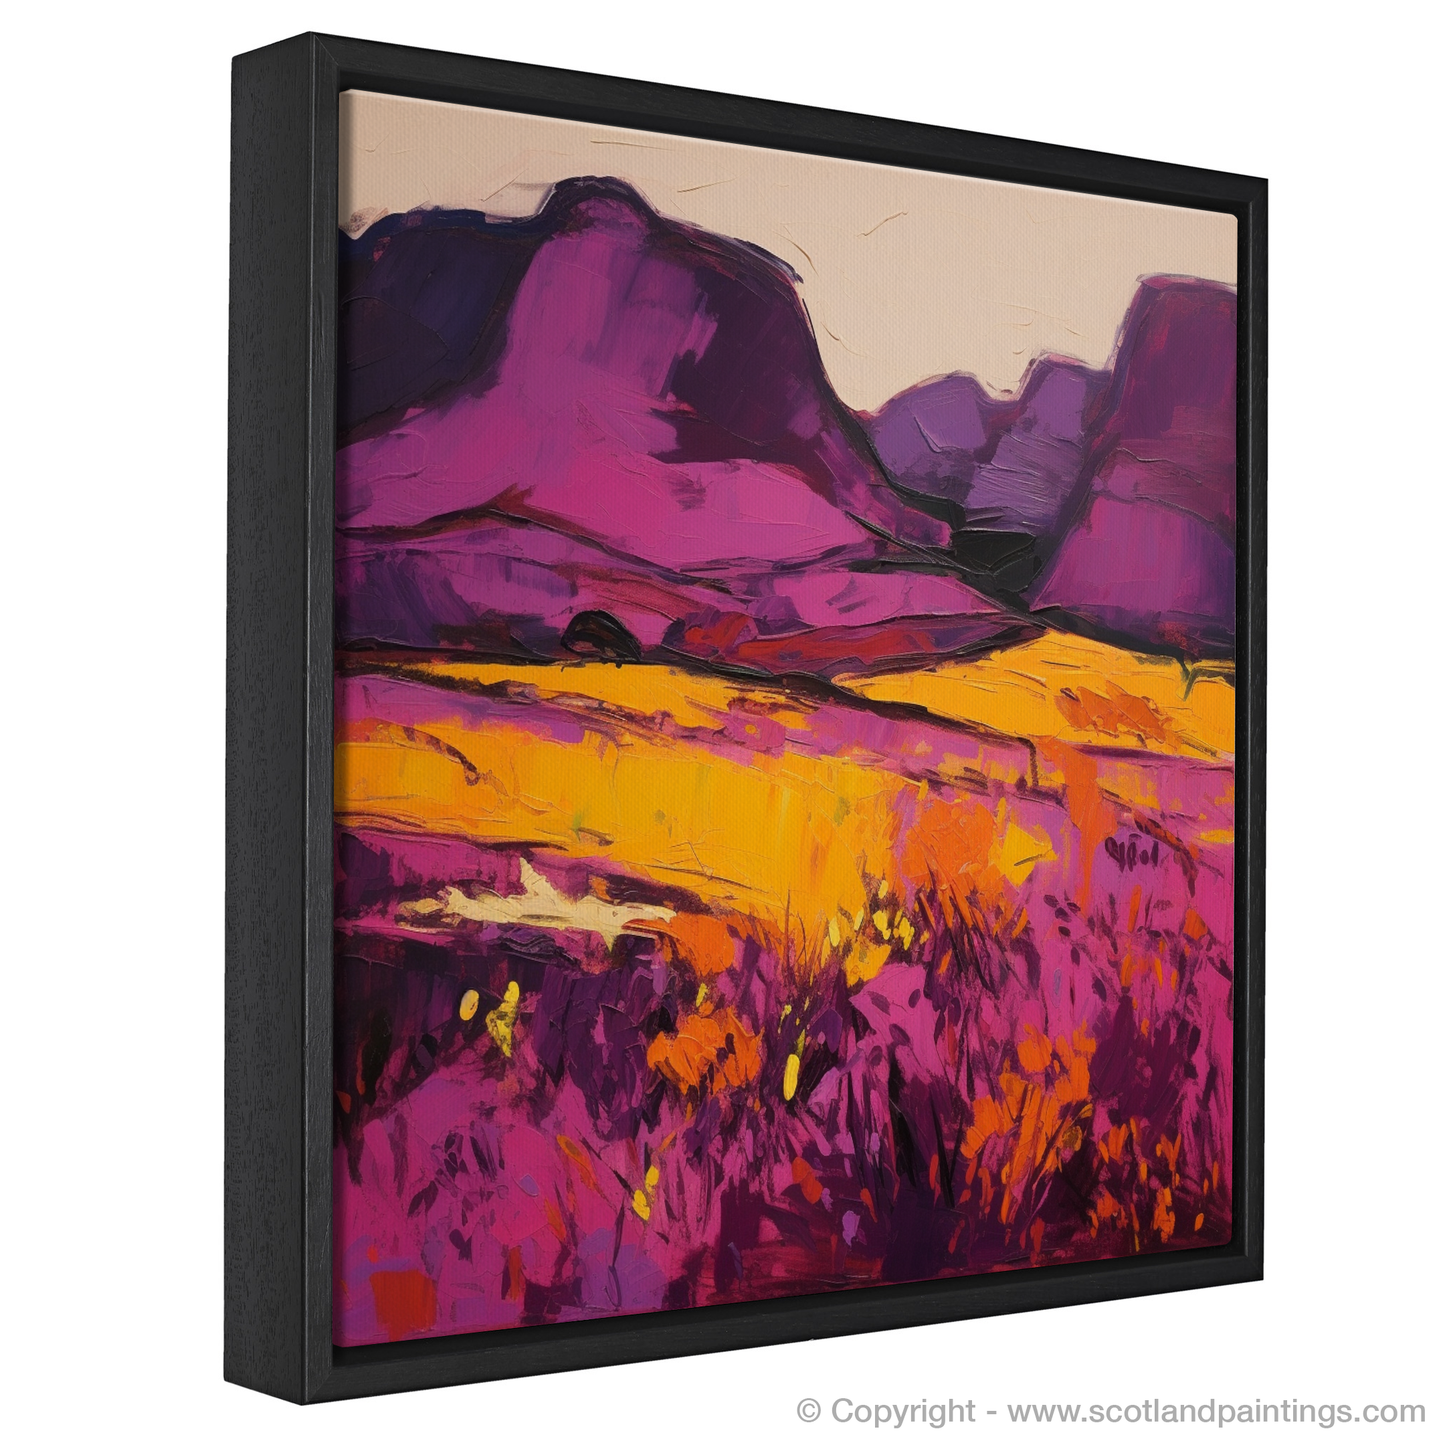 Highland Hues: An Abstract Ode to Purple Heather in Glencoe